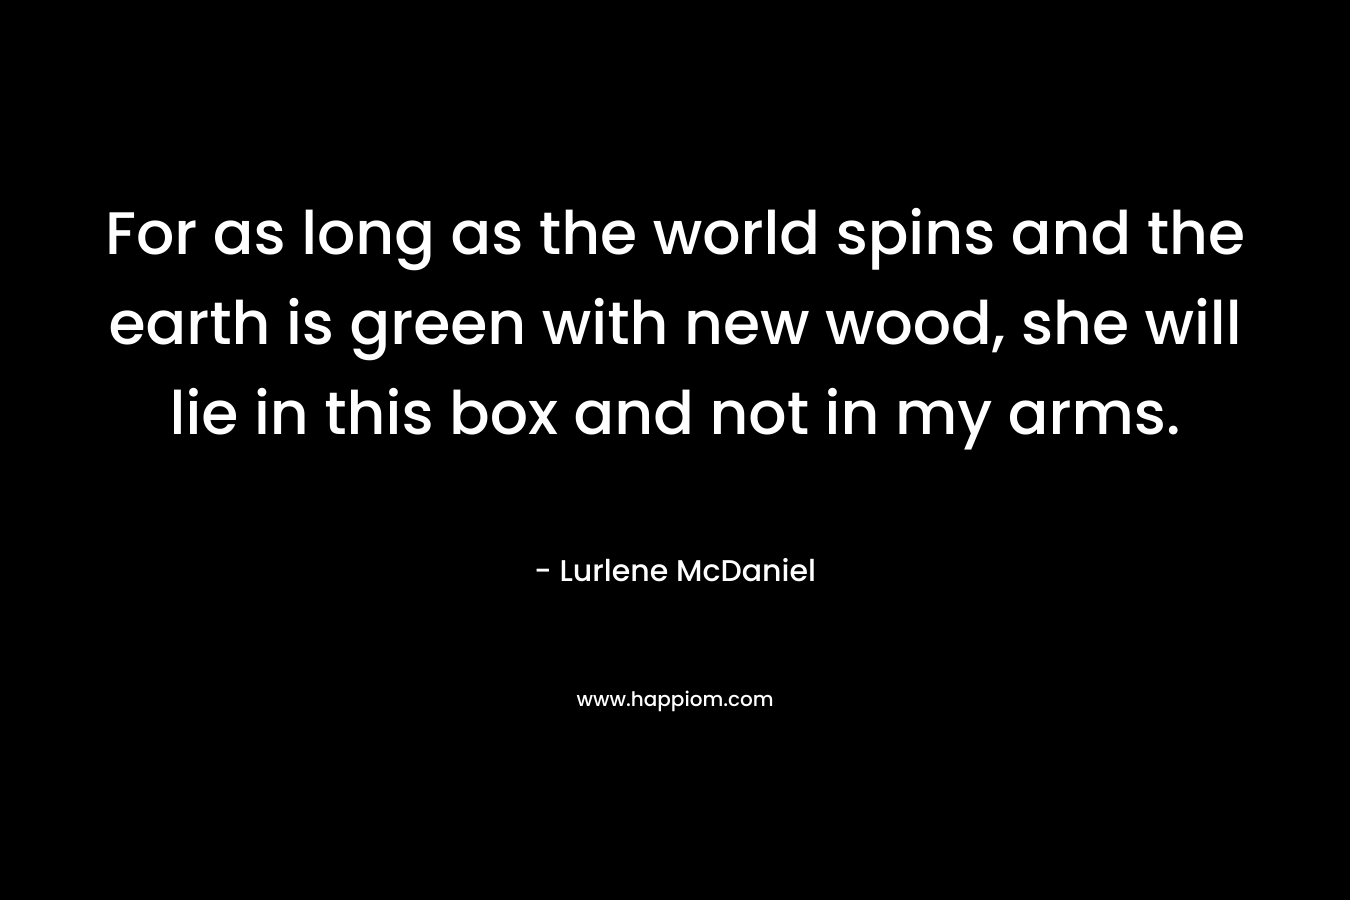 For as long as the world spins and the earth is green with new wood, she will lie in this box and not in my arms.